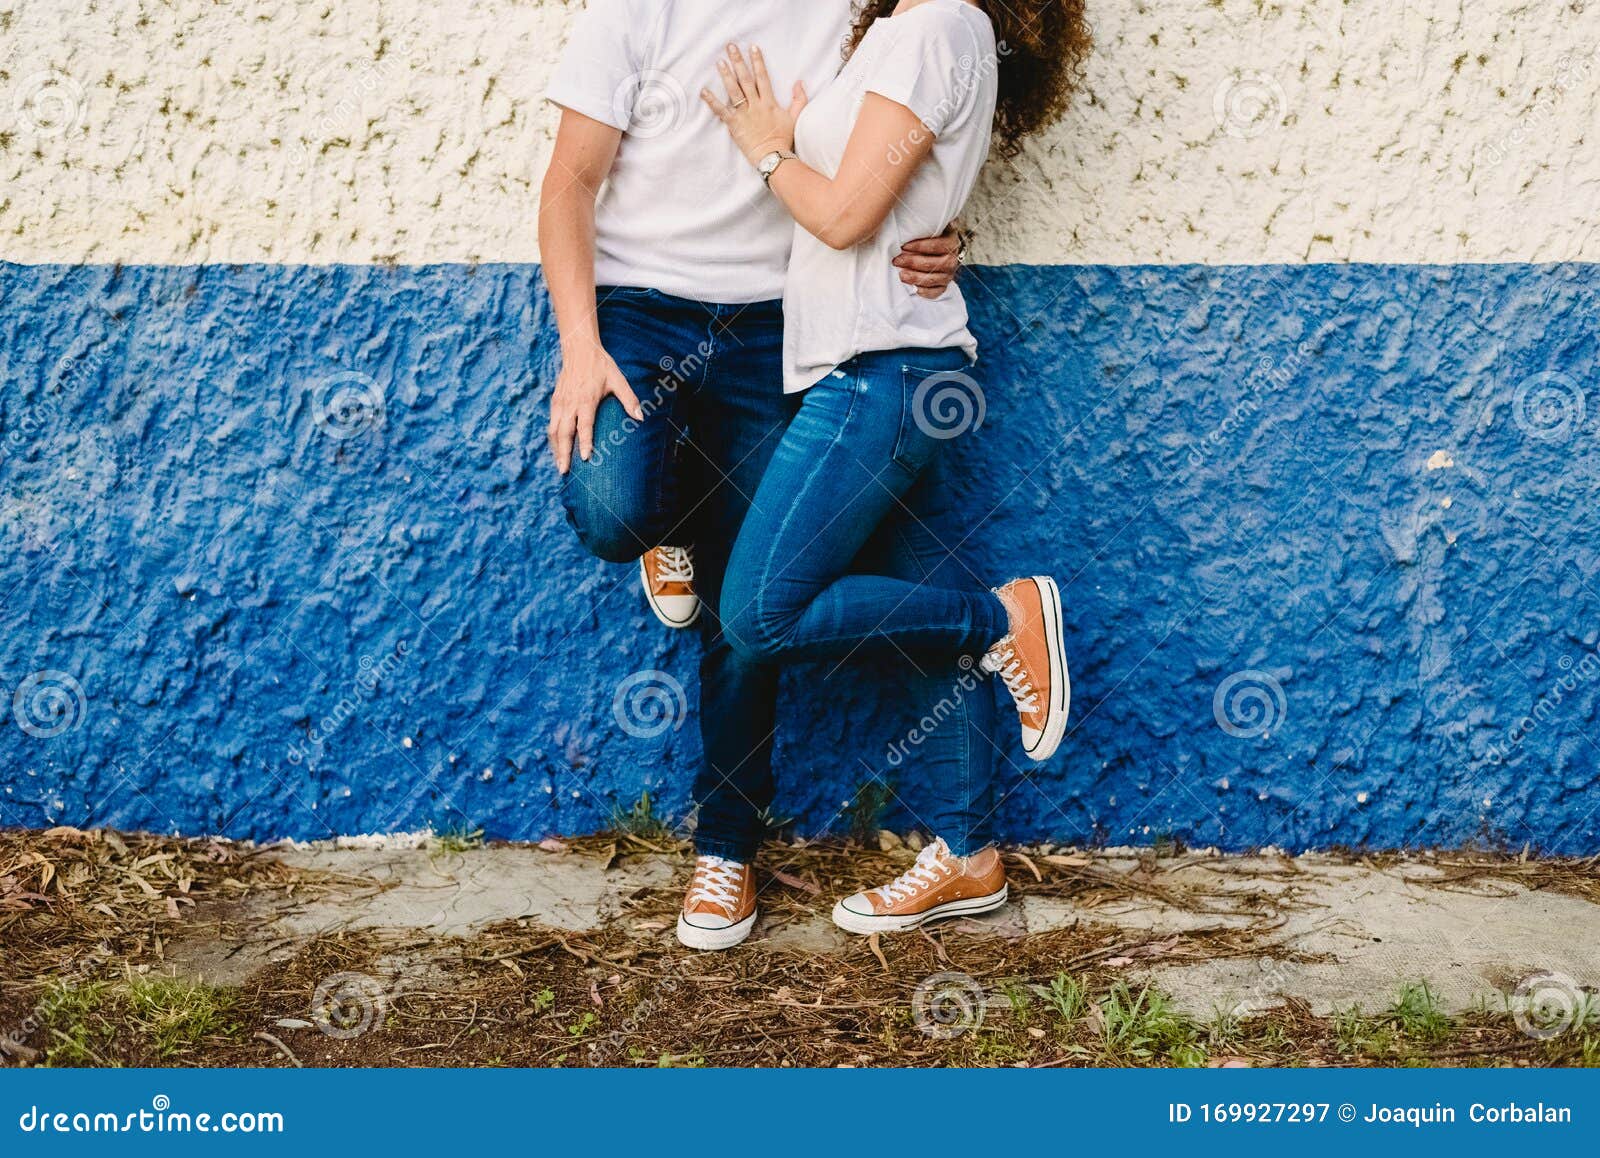 Couple of Lovers Resting on Blue and White Wall in Jeans Stock Image - Image of relationship, handsome: 169927297